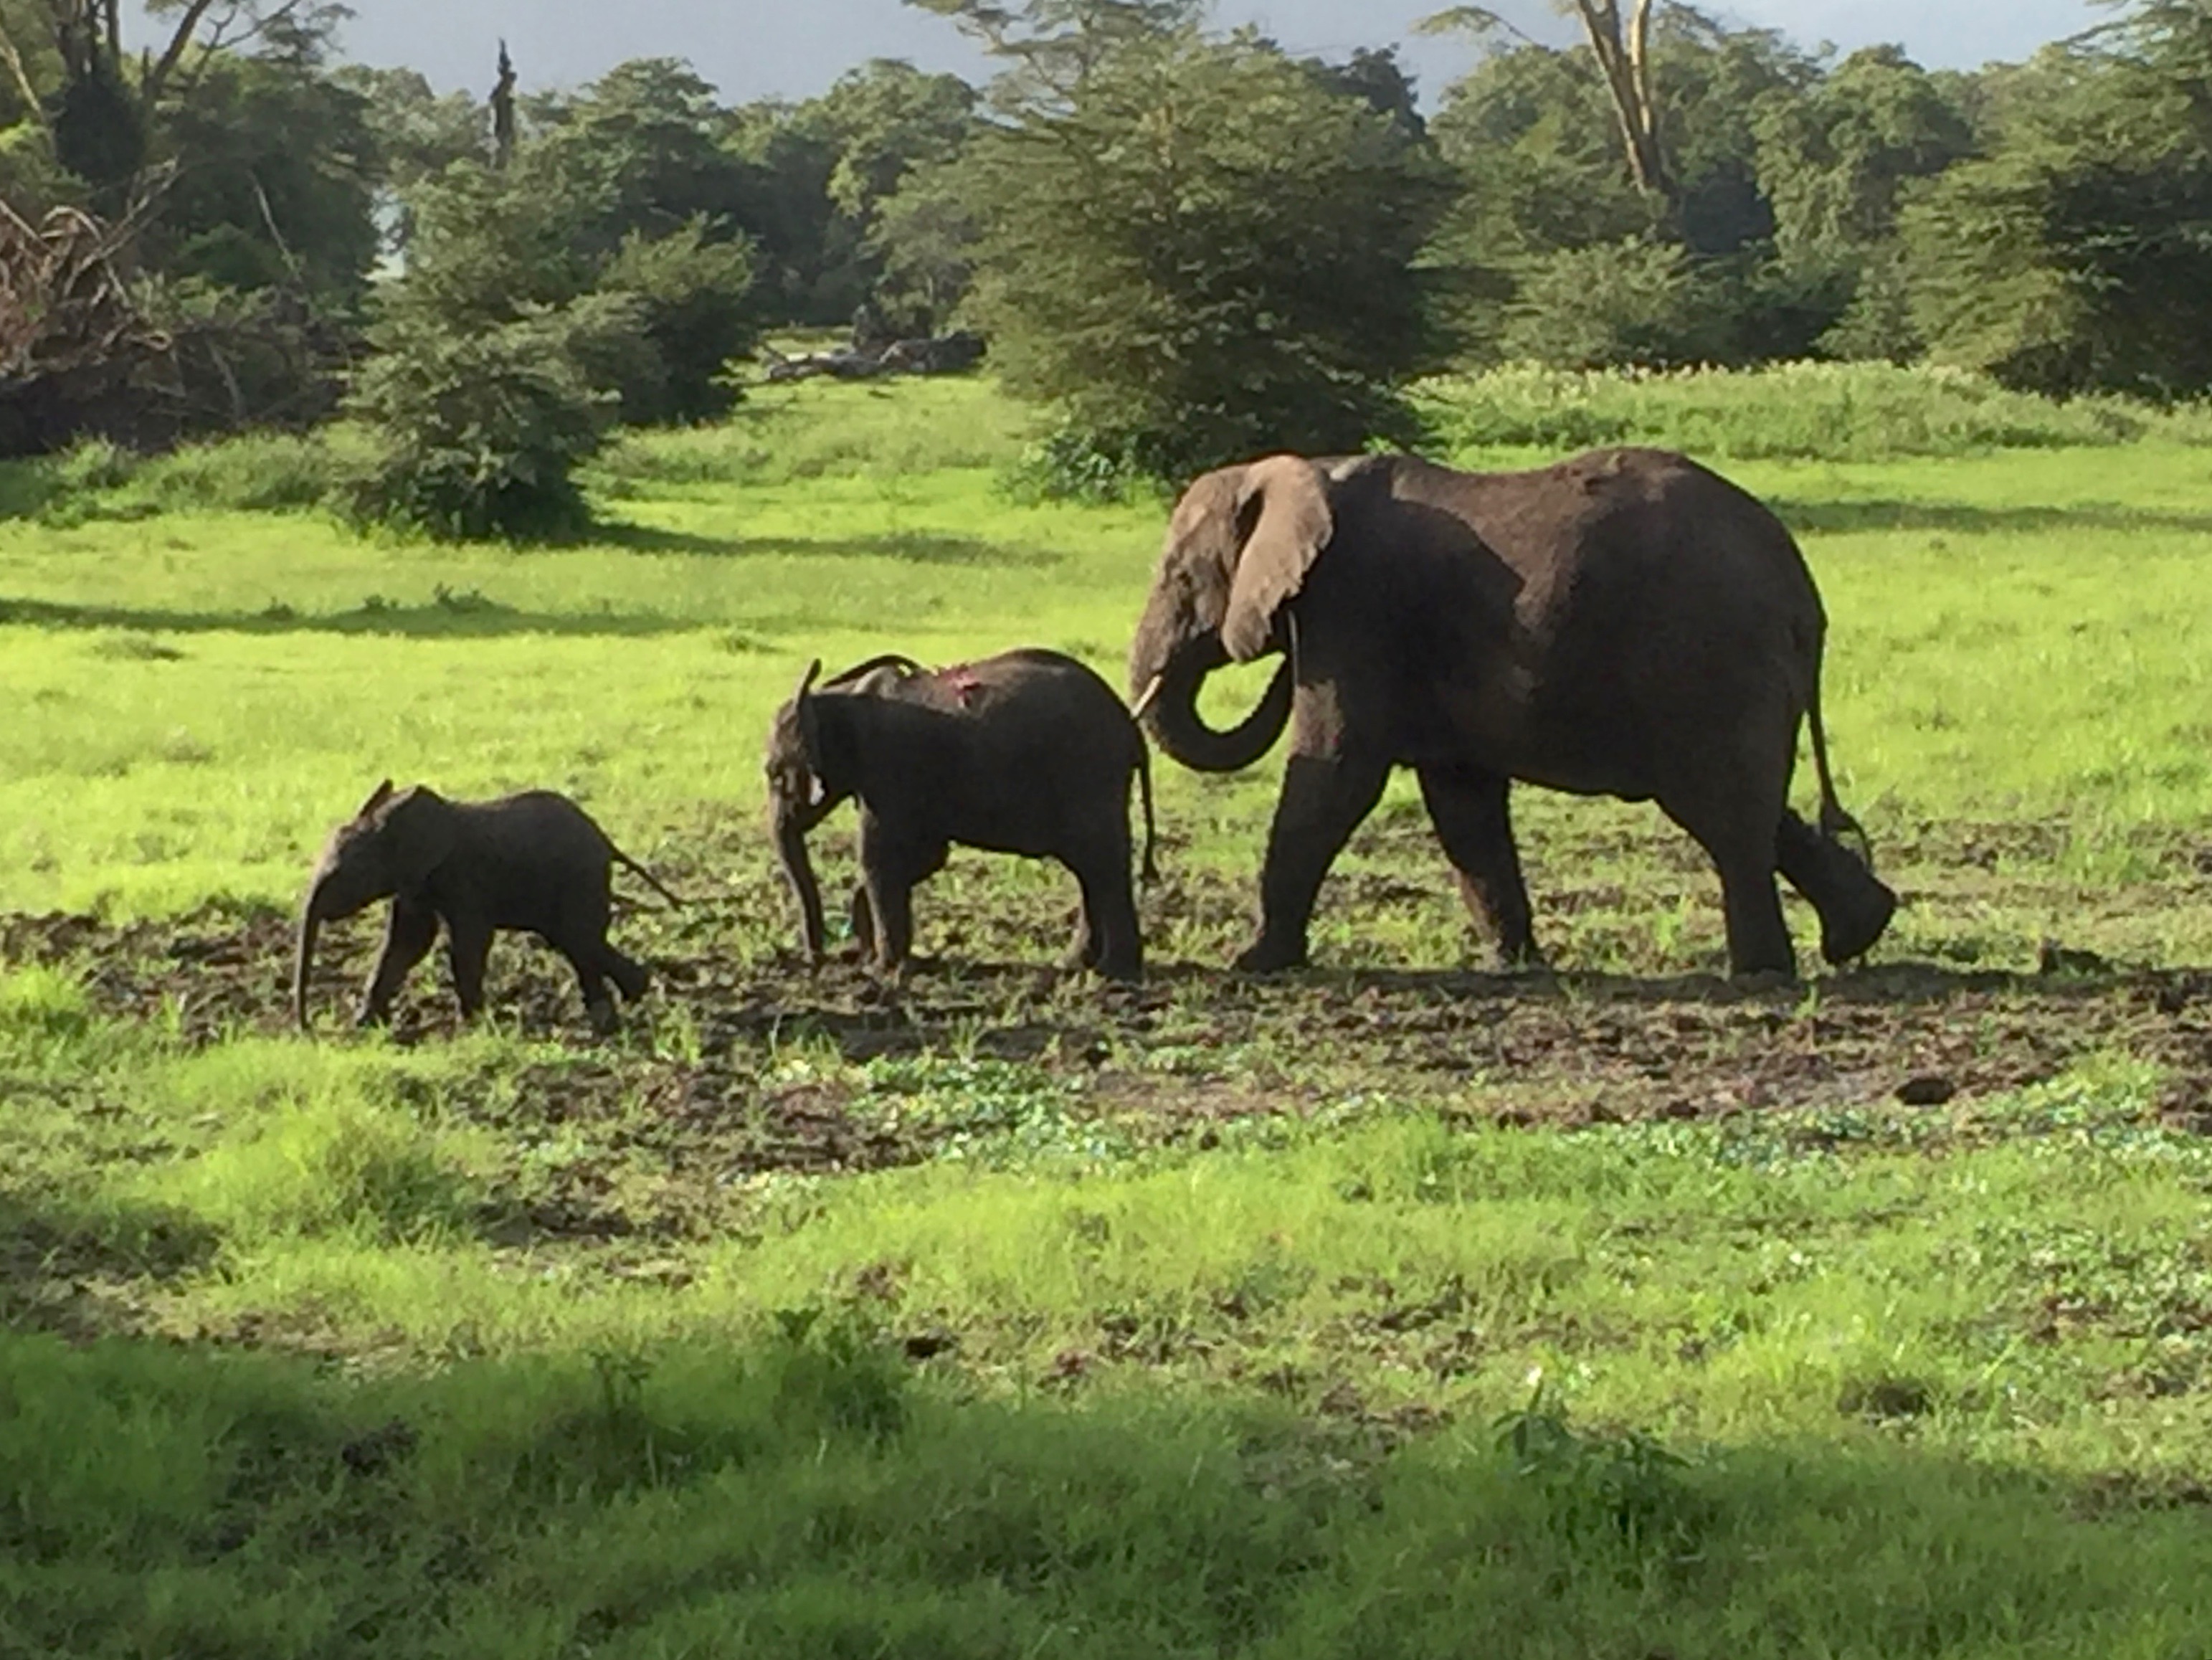 Three elephants walk across a grassy plain. Trees and shrubs are visible in the background.